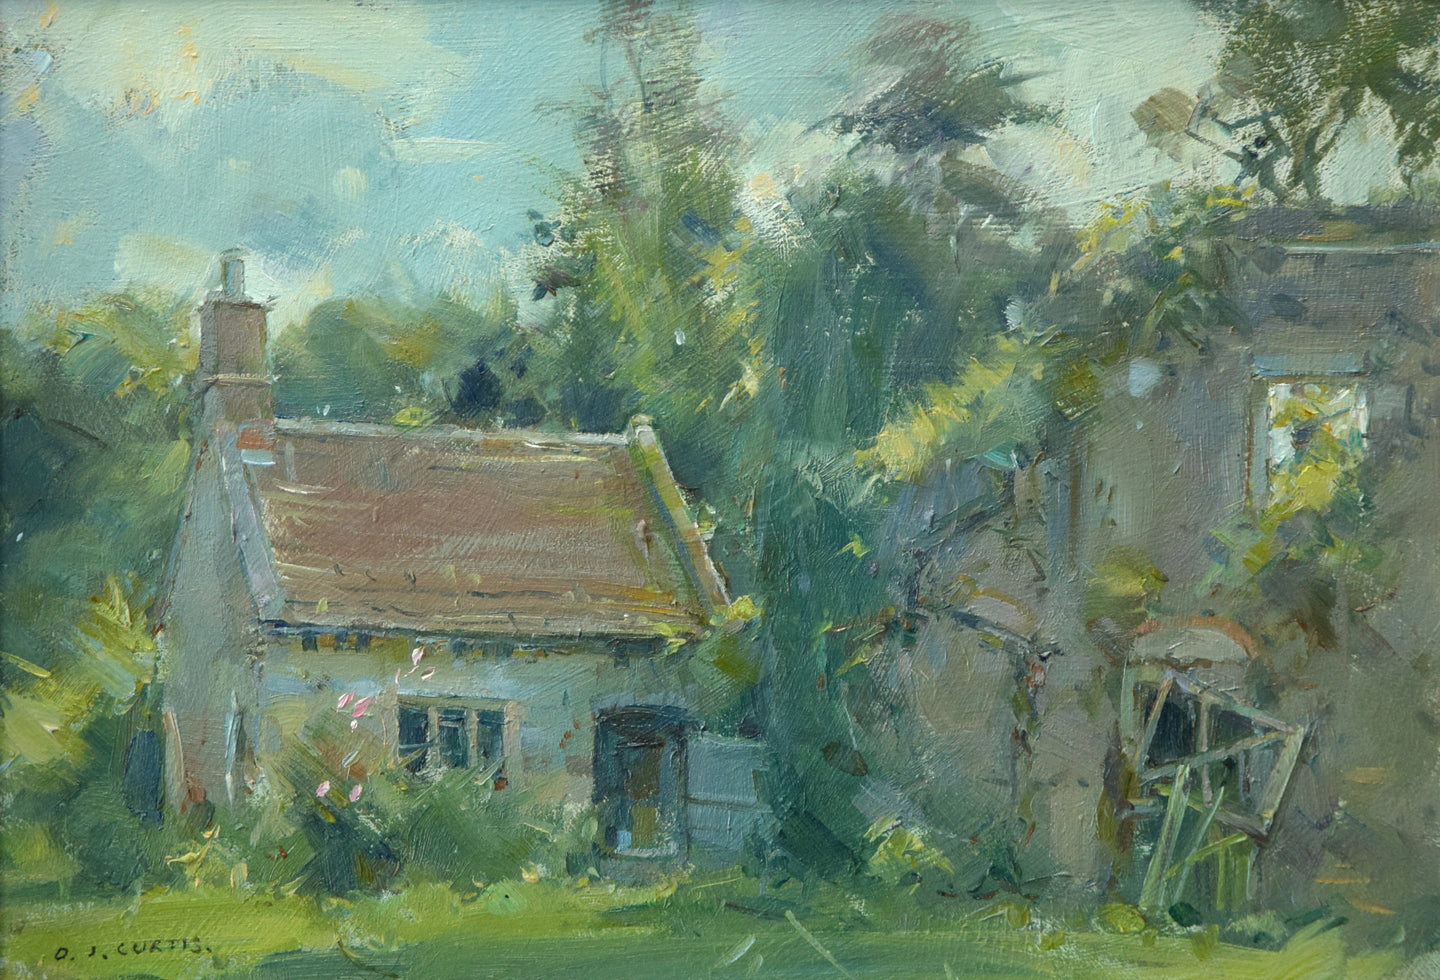 8 x 11.5 oil painting with a bothy left of centre, and part of the old rectory ruin to the right, 'moved' to combine both buildings in the painting.